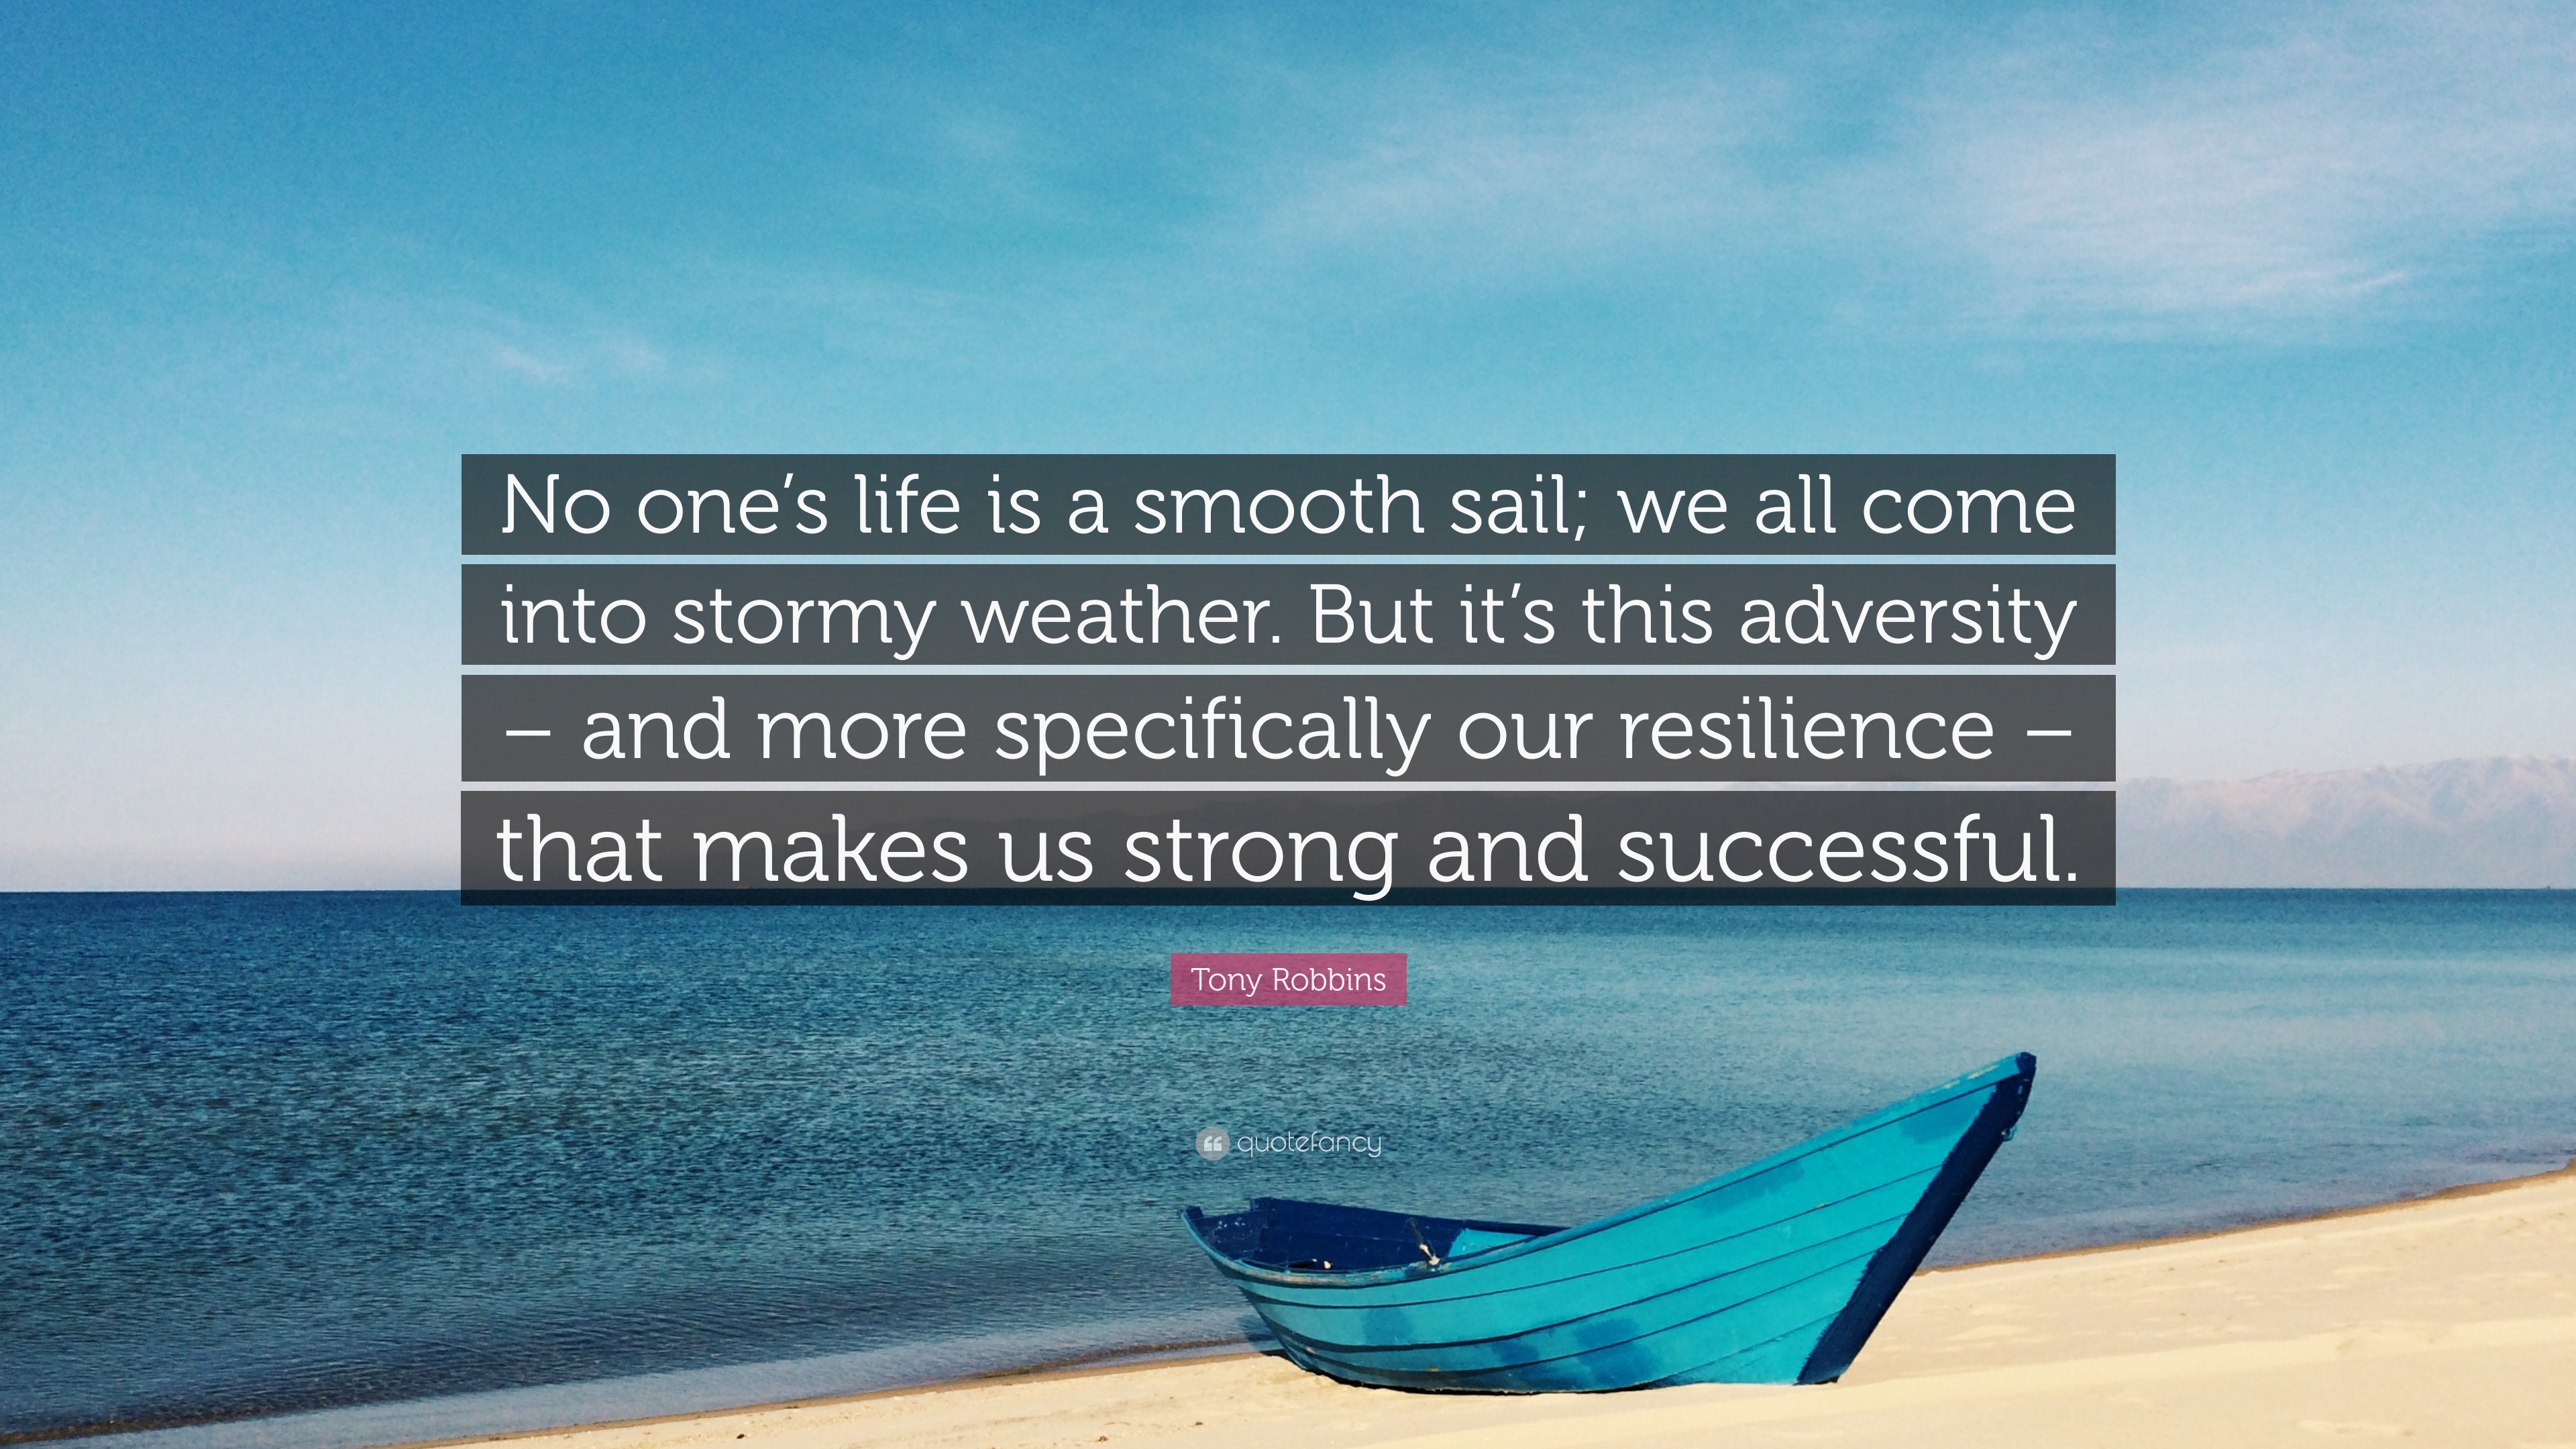 Tony Robbins Quote: “No one's life is a smooth sail; we all come into  stormy weather. But it's this adversity – and more specifically our res”